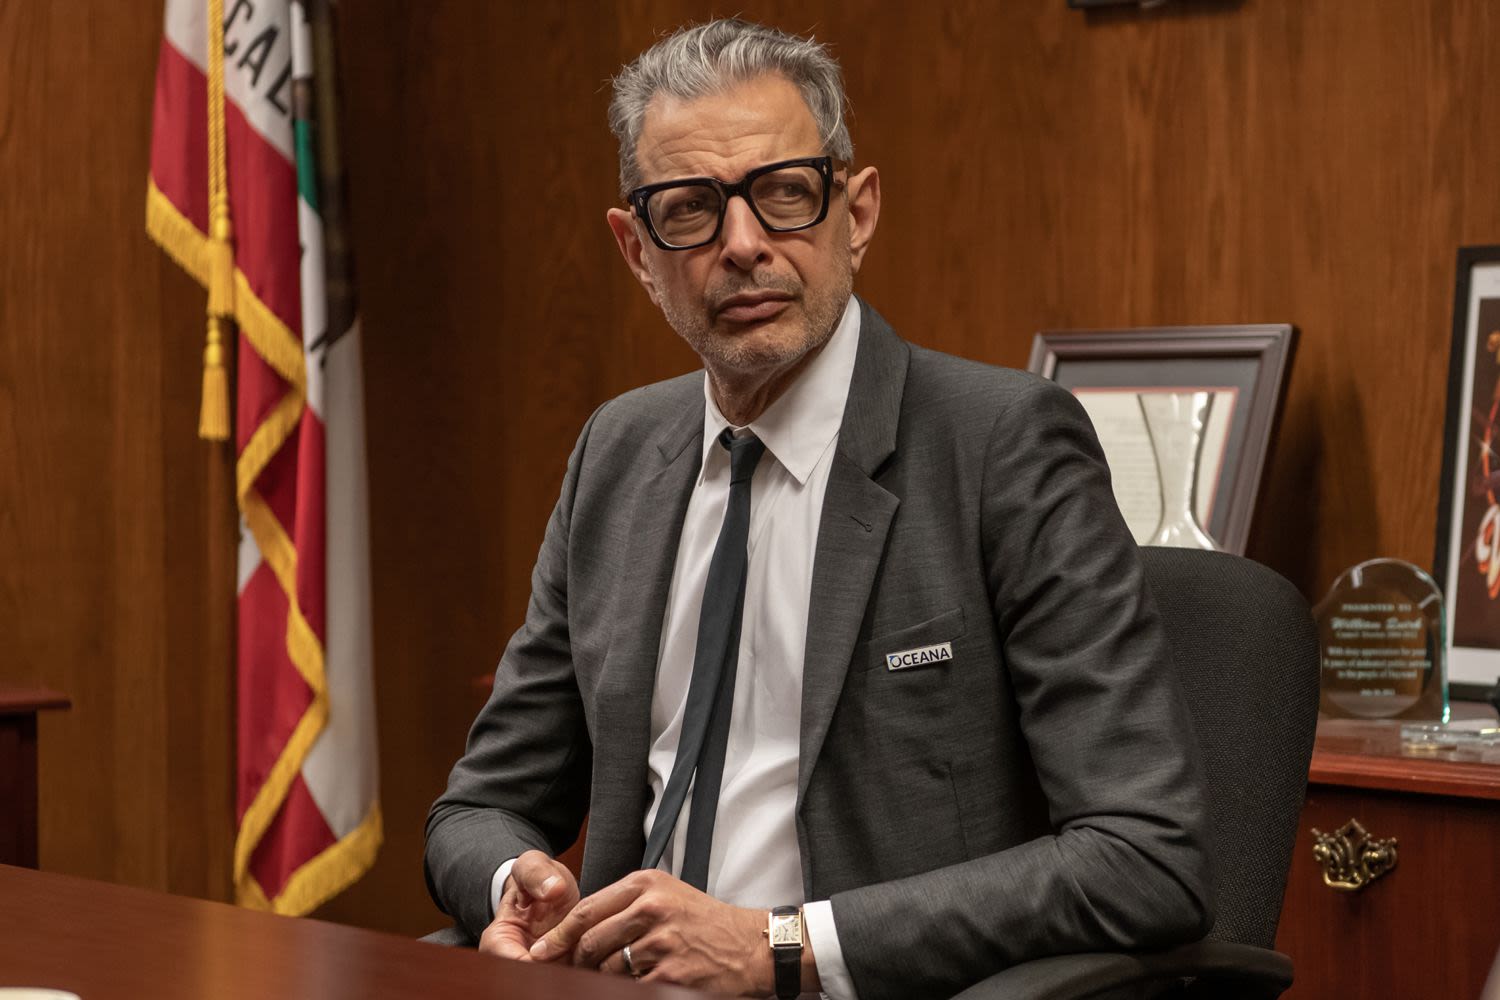 Jeff Goldblum Says Oceans Are ‘Crying Out' for Help as ‘2 Garbage Trucks’ of Plastic Are Dumped in Every Minute (Exclusive)